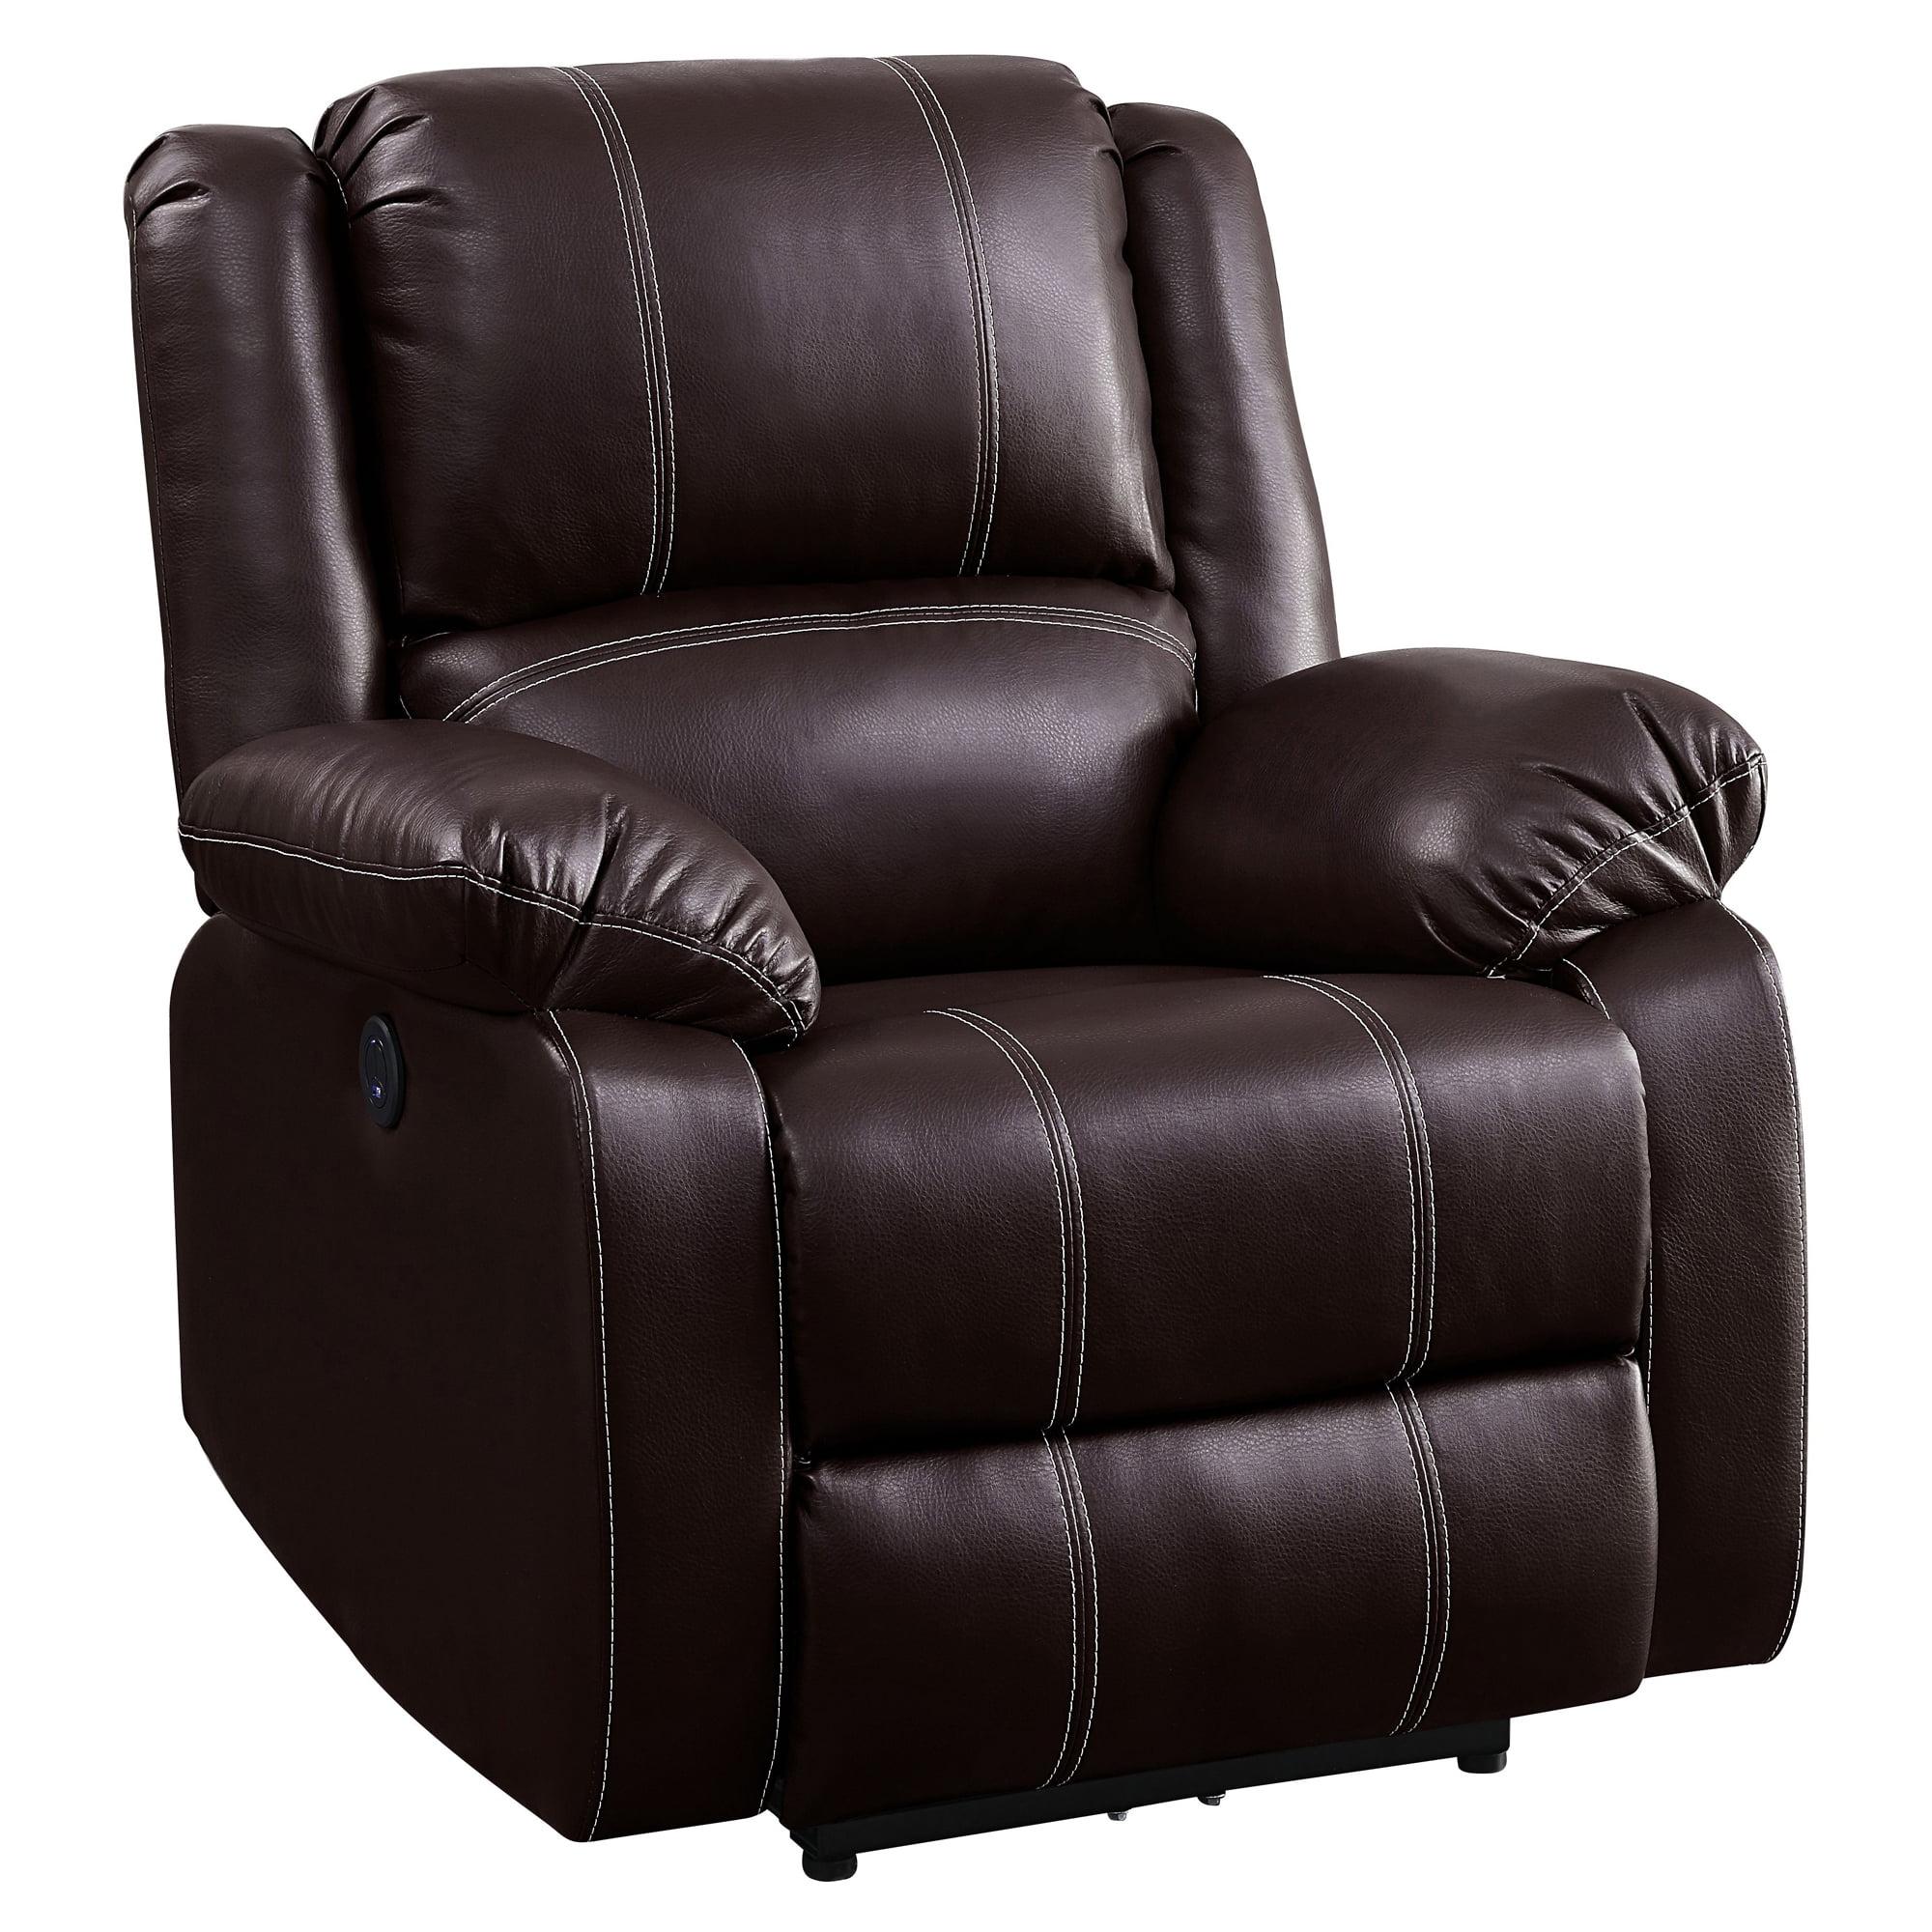 ComfyCraft Brown Faux Leather Power Recliner with USB Port